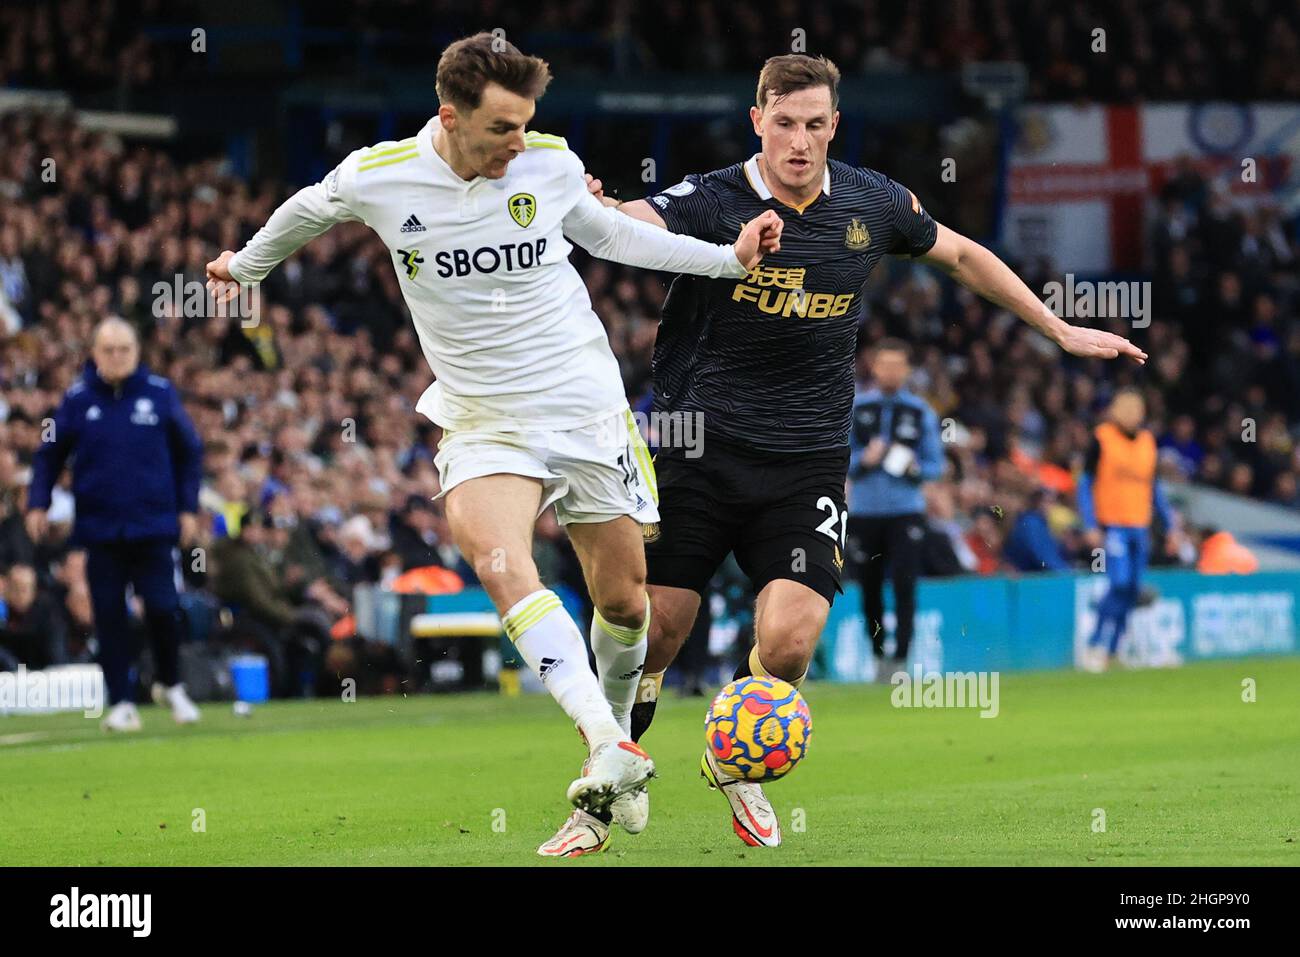 Leeds, UK. 22nd Jan, 2022. Diego Llorente #14 of Leeds United passes back under pressure from Chris Wood #20 of Newcastle United during the Premier League fixture Leeds United vs Newcastle United at Elland Road, Leeds, UK, 22nd January 2022 Credit: News Images /Alamy Live News Stock Photo